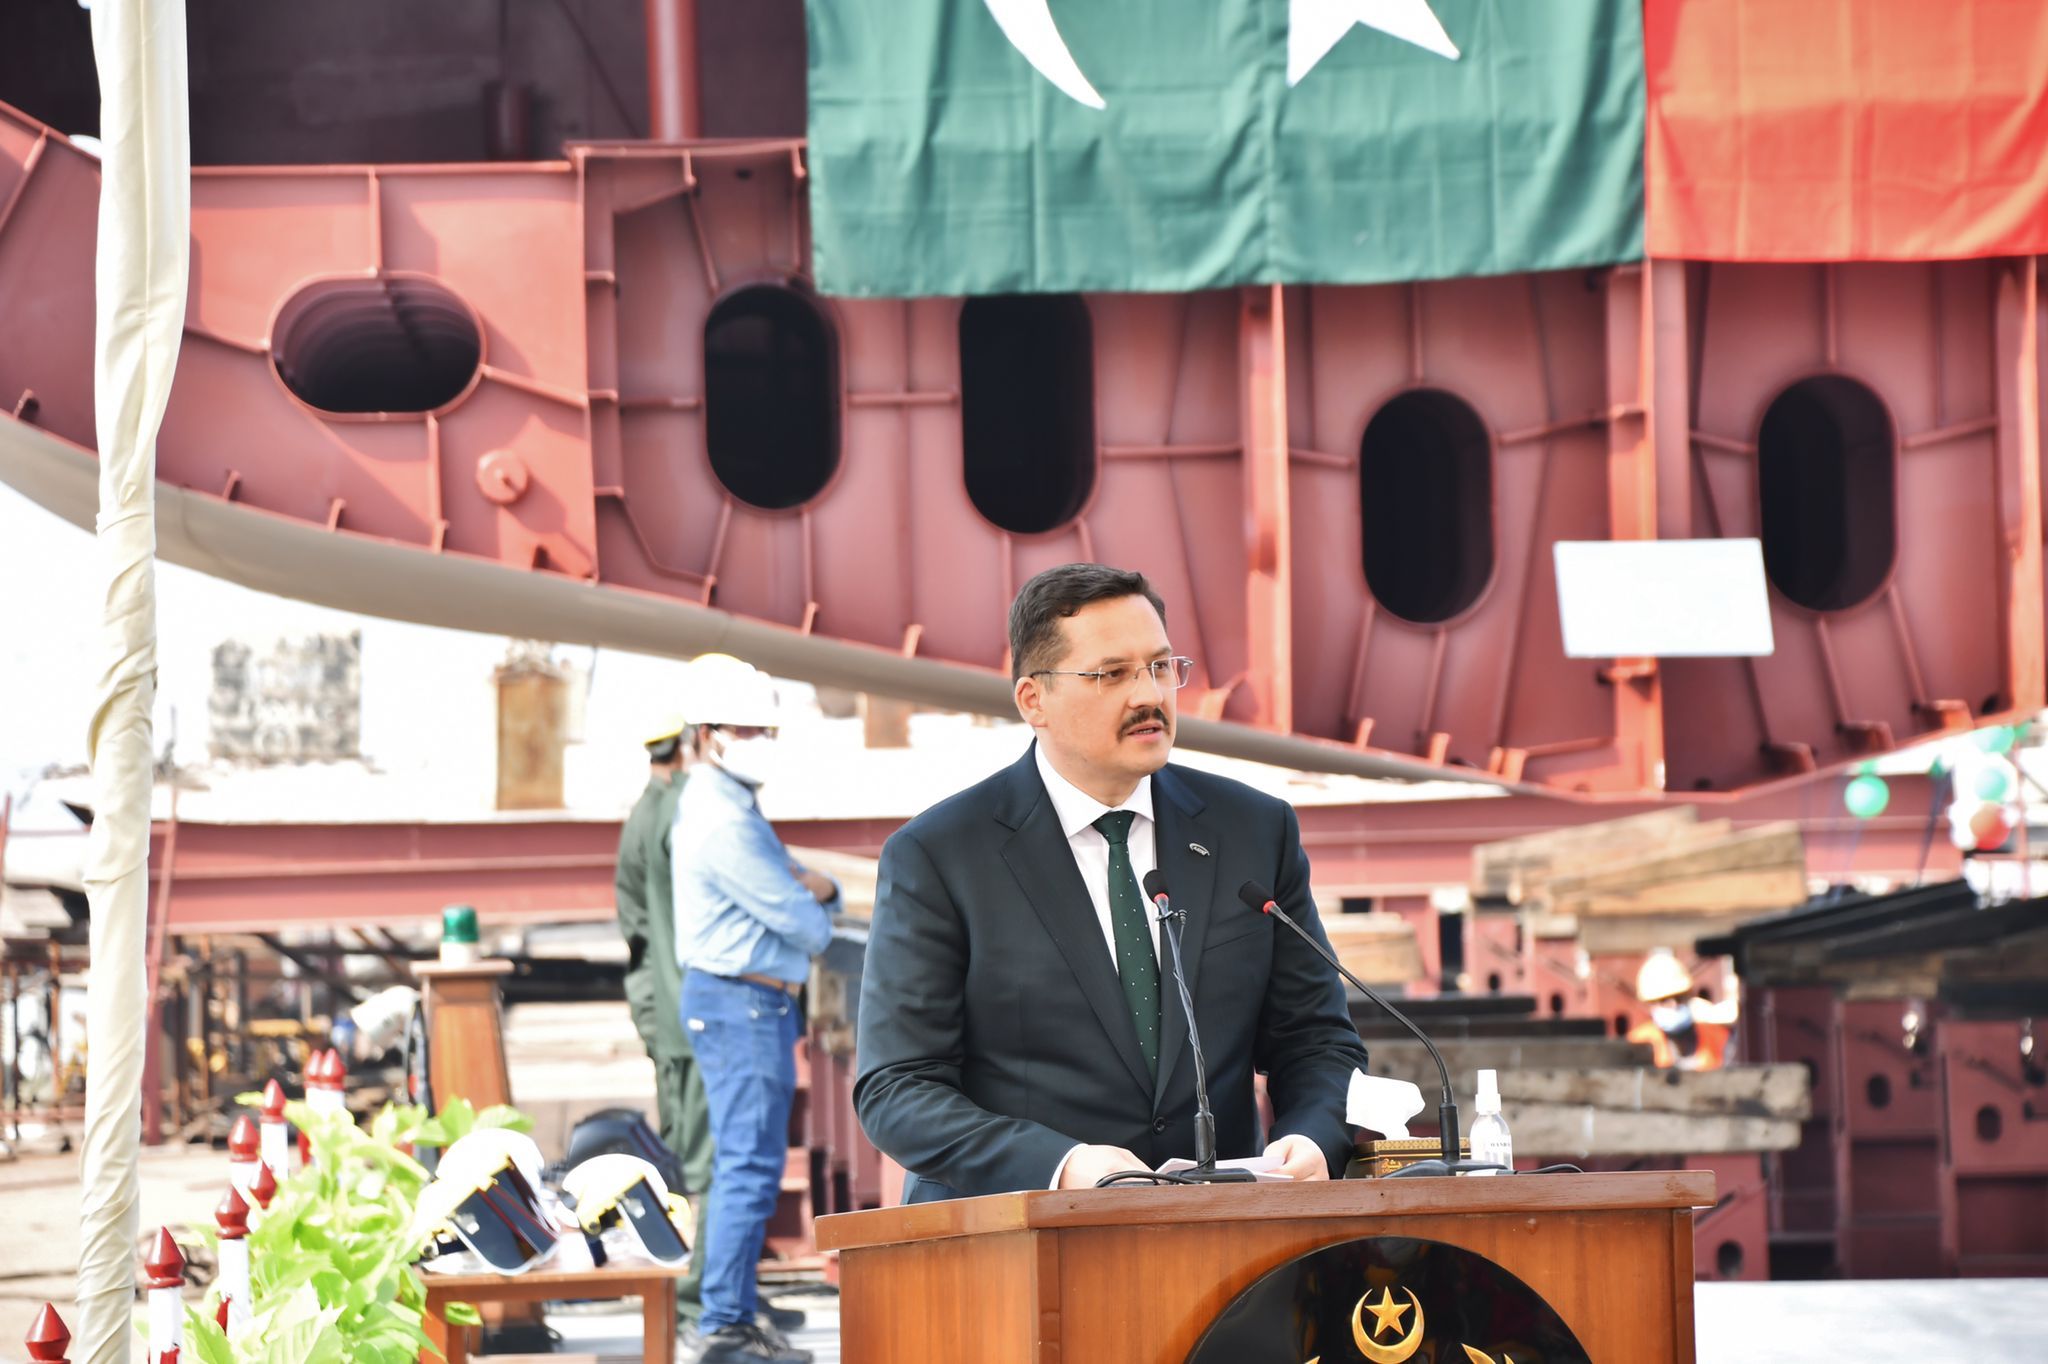  ASFAT Held Keel-Laying Ceremony for Pakistan’s  PN Milgem-4 Frigate